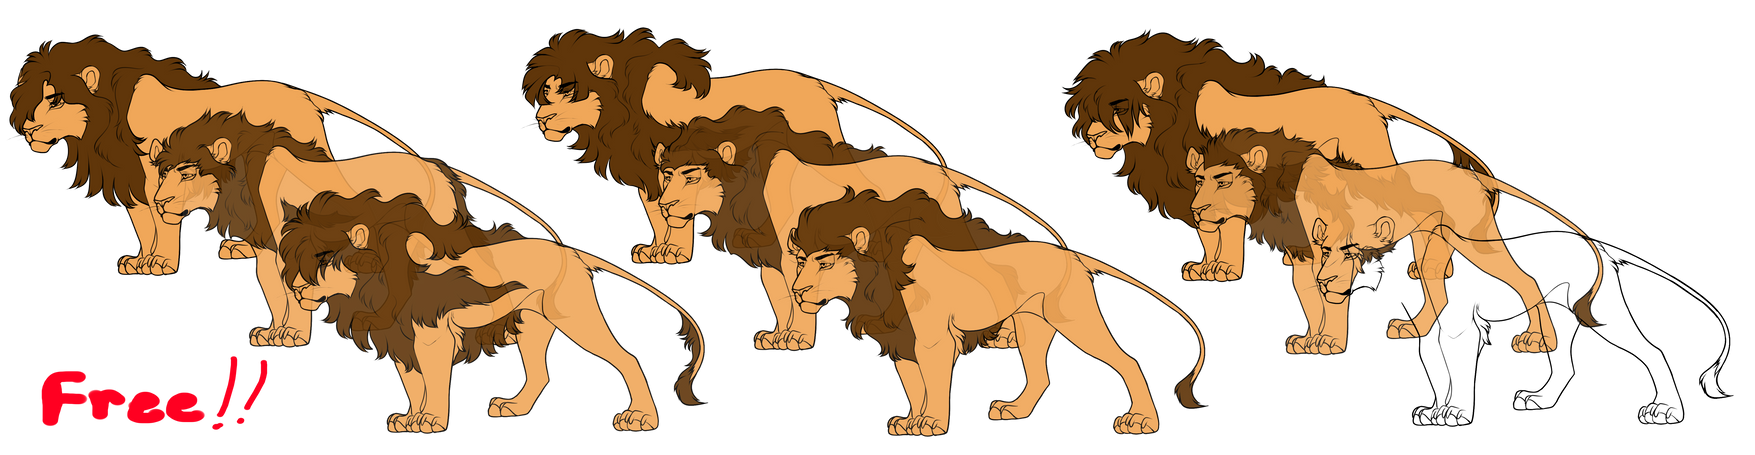 FREE Lion base PSD and PNG (8 Manes)